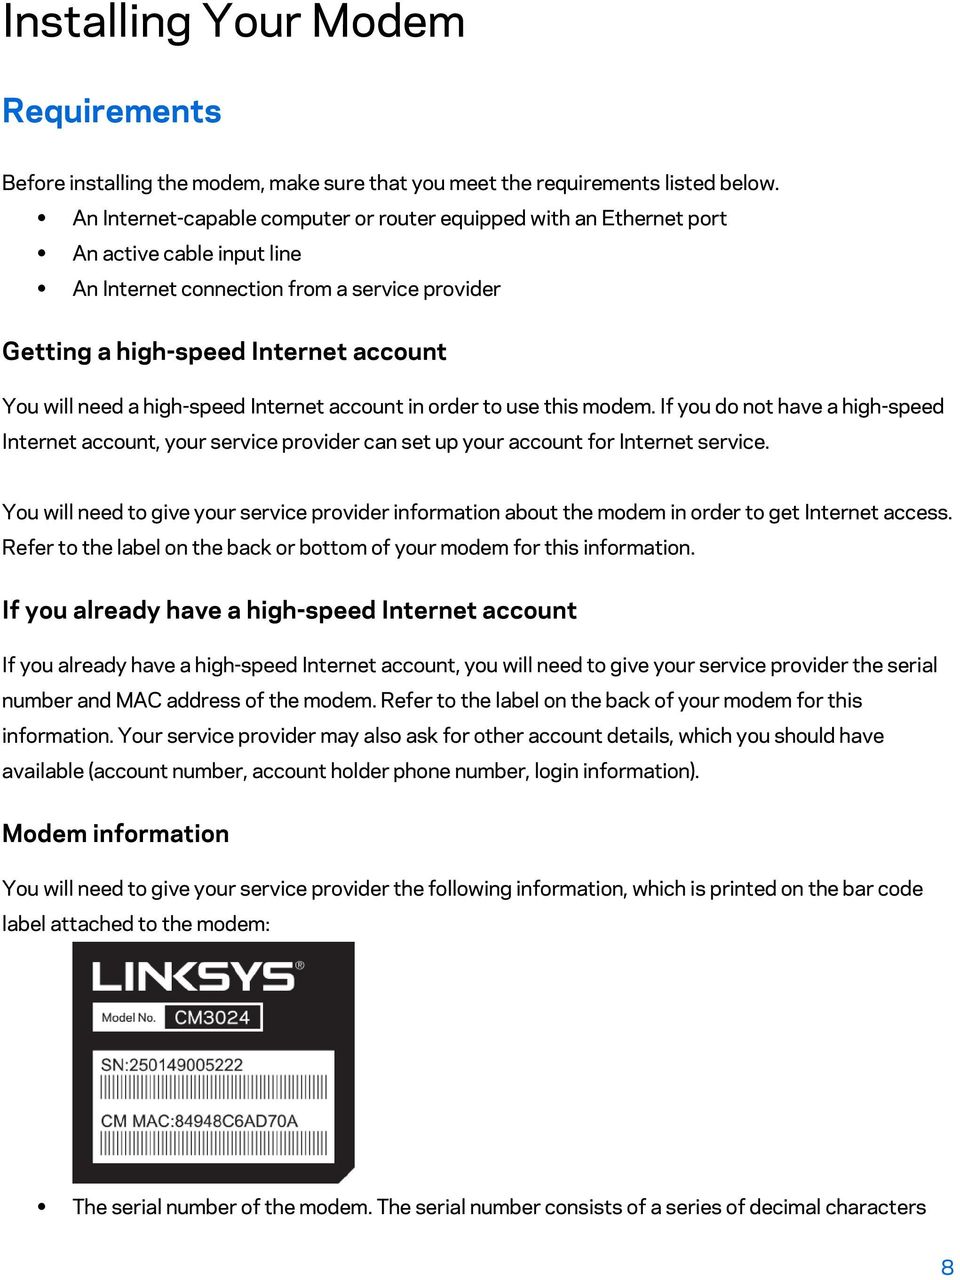 high-speed Internet account in order to use this modem. If you do not have a high-speed Internet account, your service provider can set up your account for Internet service.